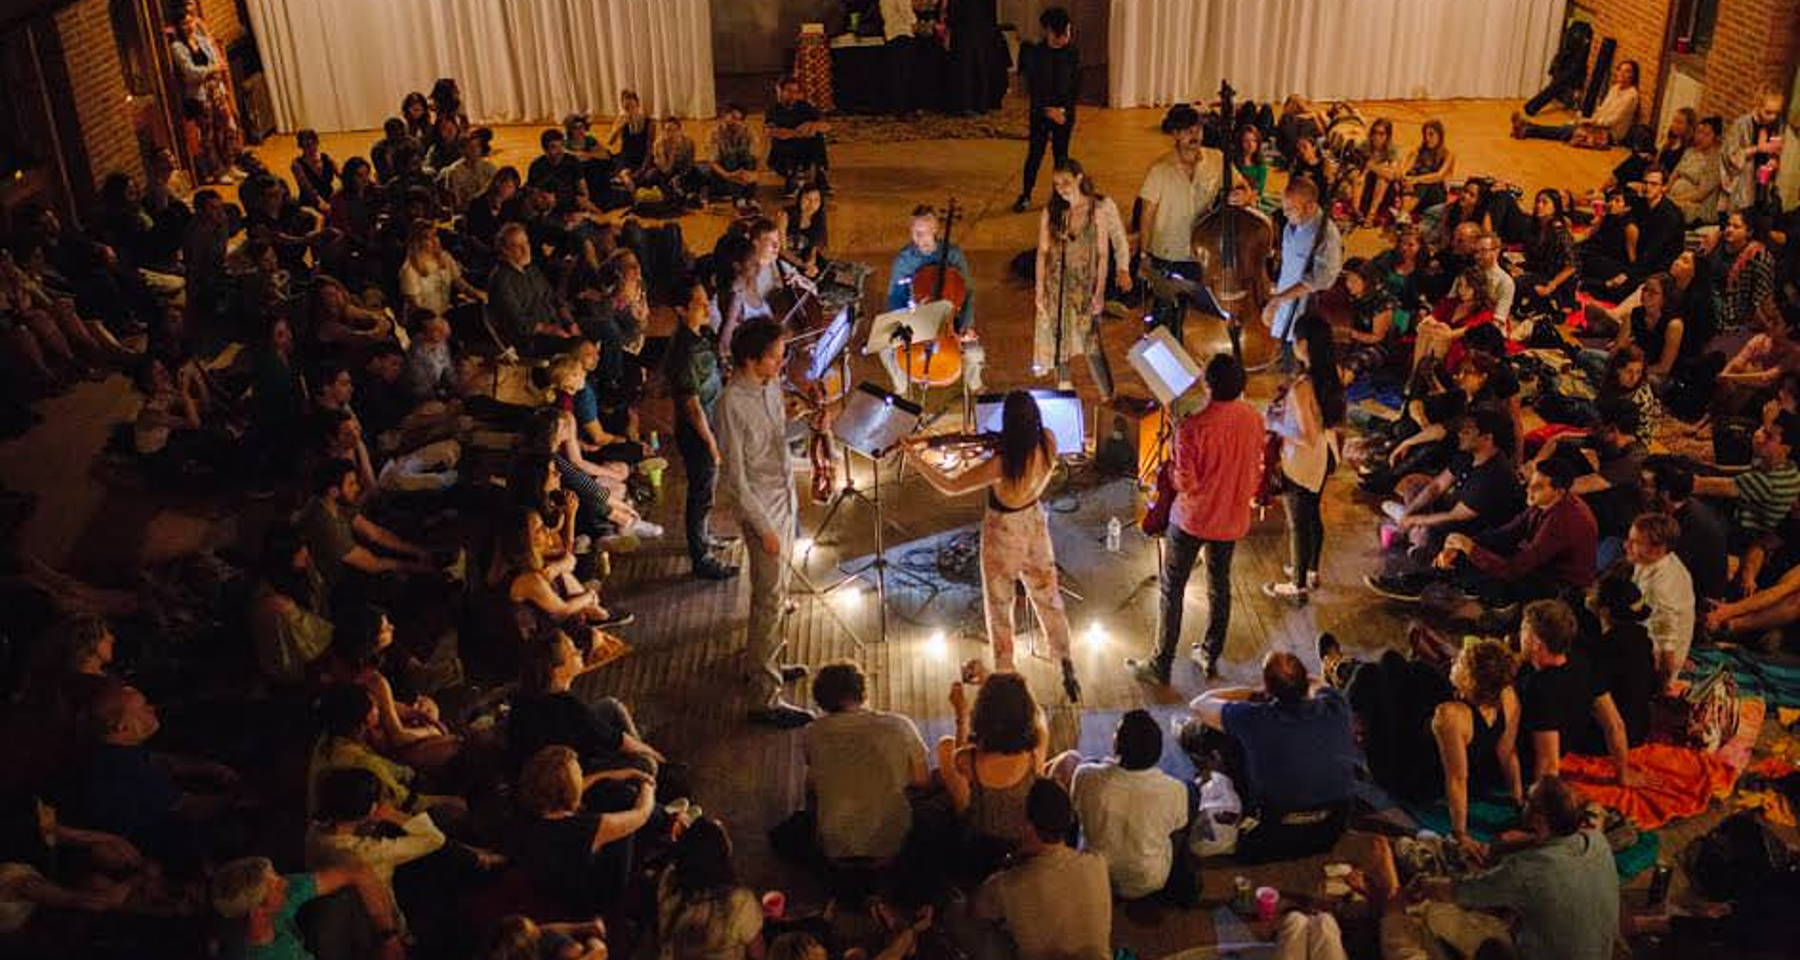 immersive gallery gala ~ bartok, cosmogenies, ballet, DRUM FOR YOUR LIFE afterparty